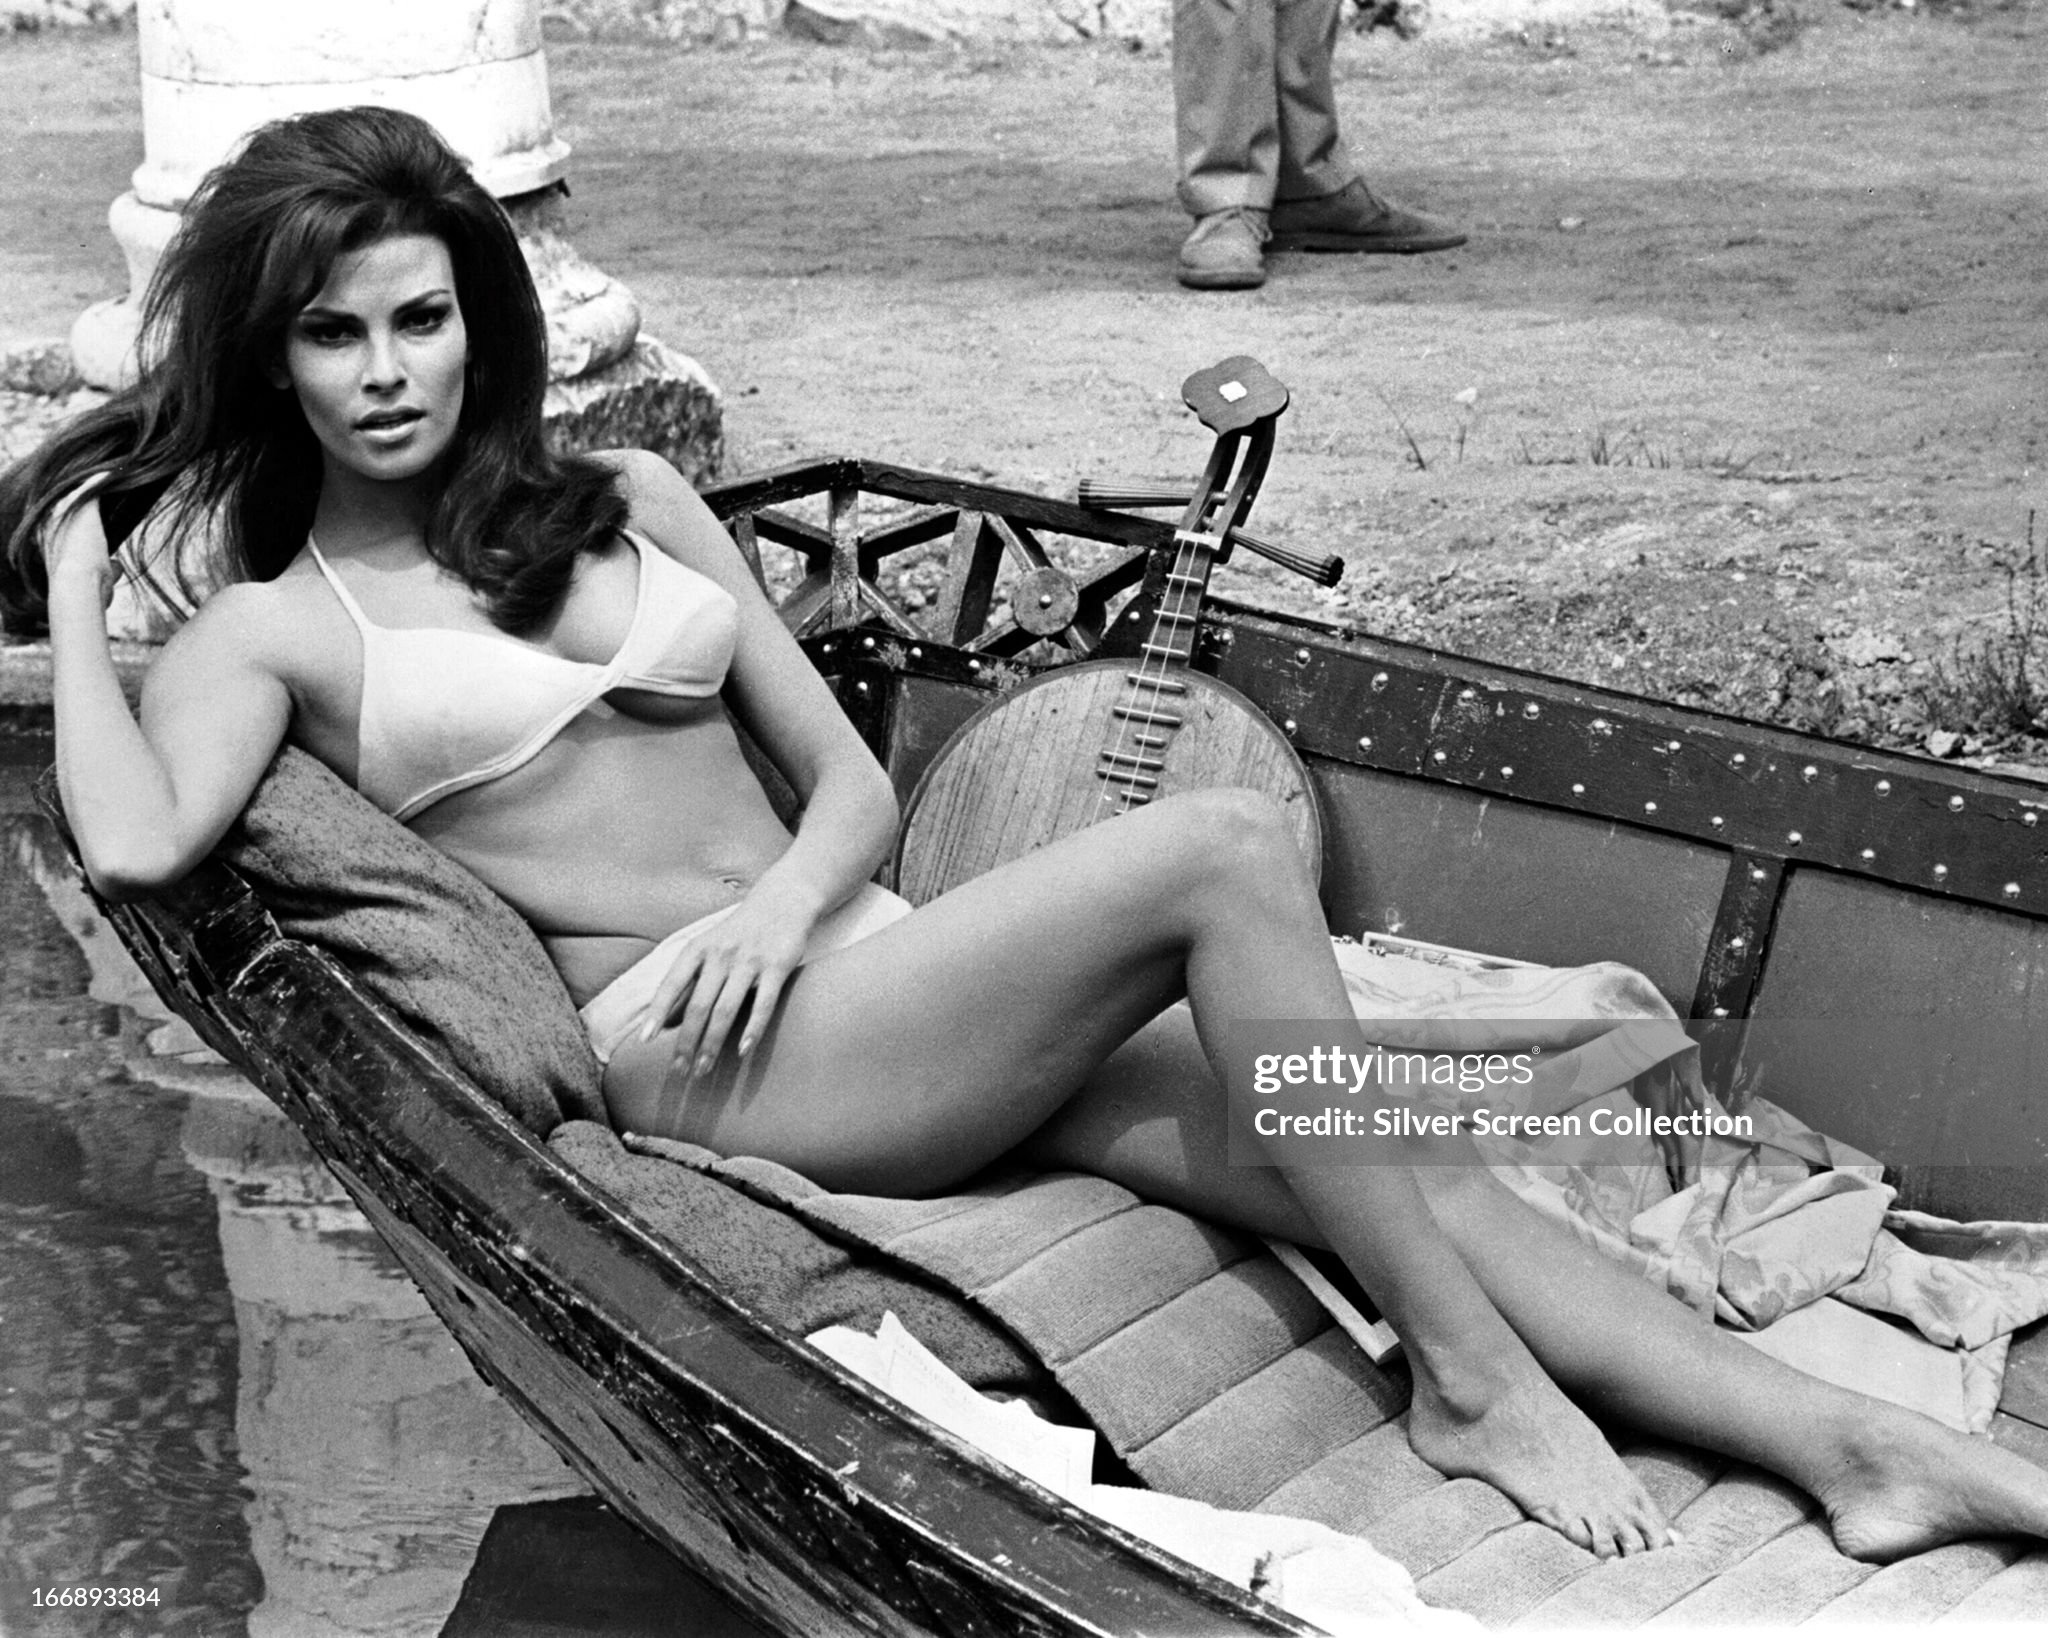 American actress Raquel Welch wearing a bikini in 1968 on the set of 'The biggest bundle of them all', directed by Ken Annakin. 